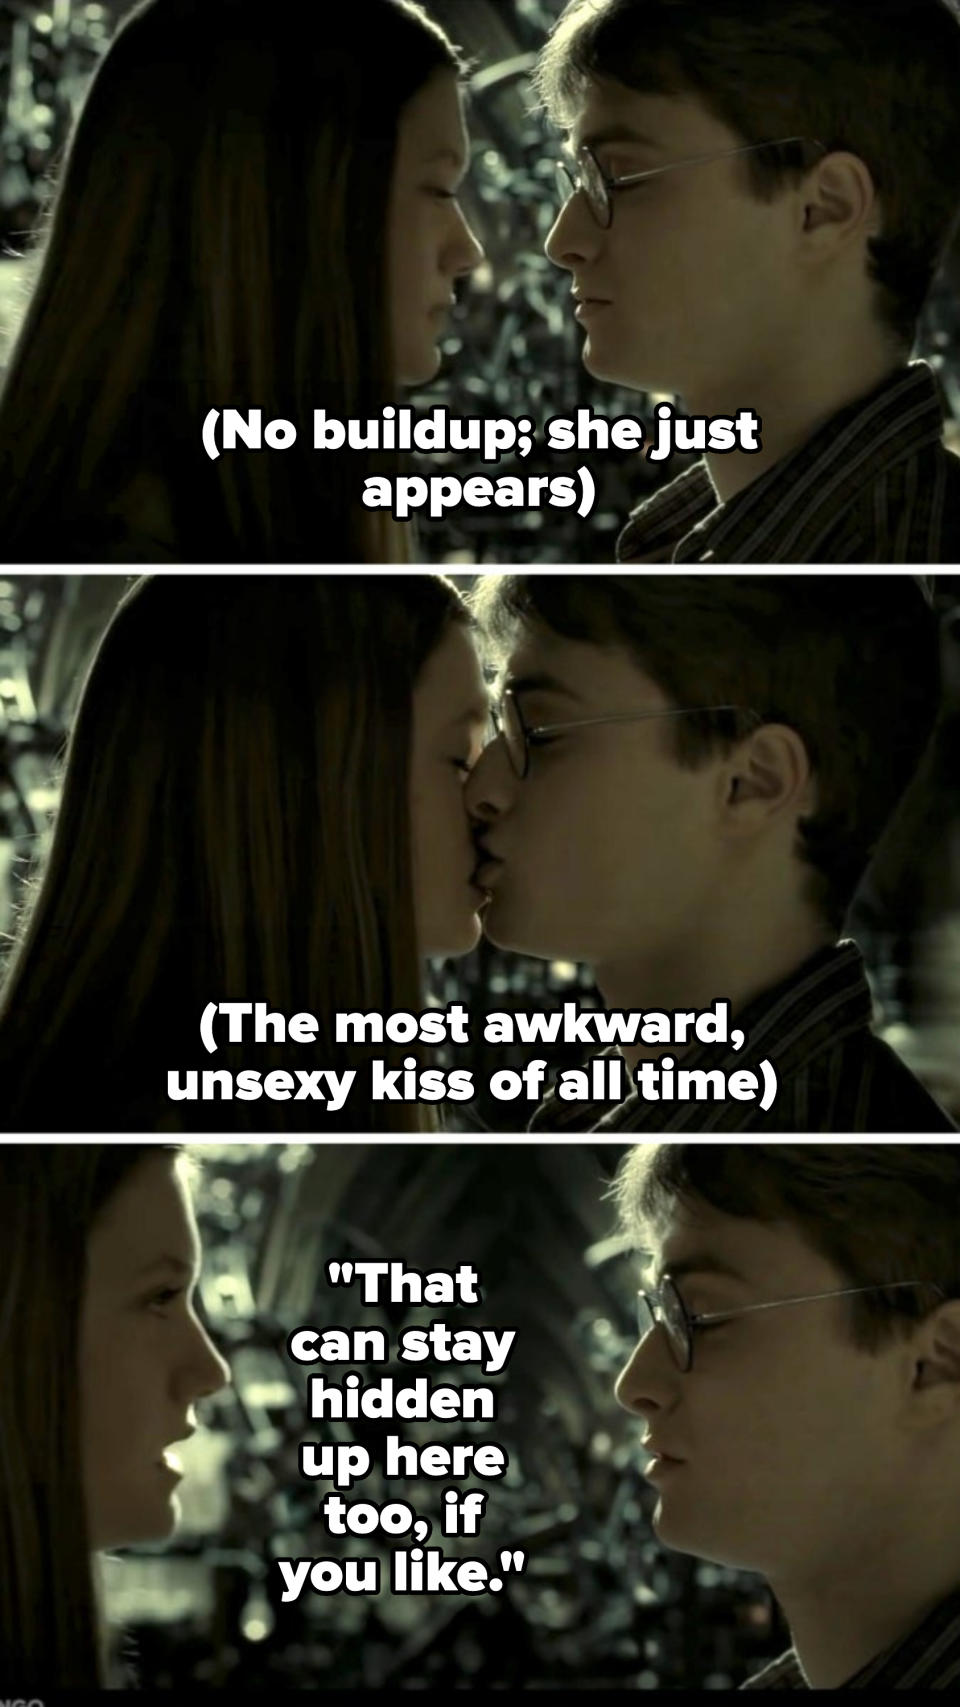 the most awkward kiss between the two